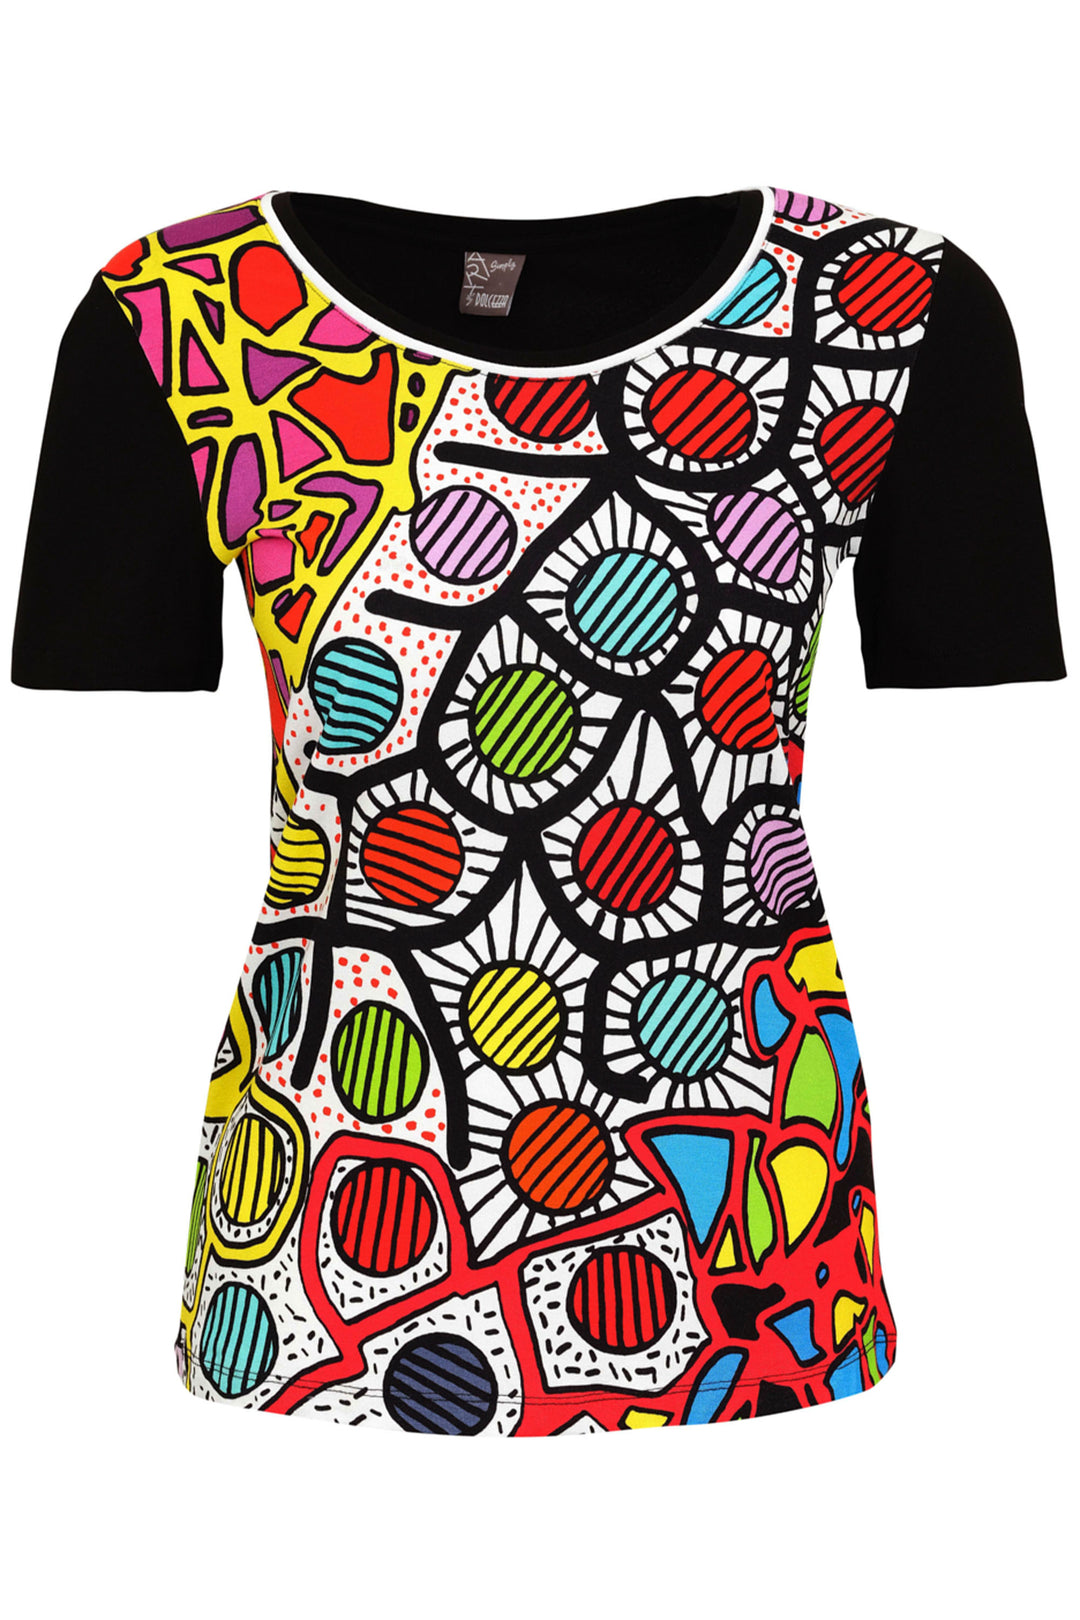 Dolcezza Spring 2024 Featuring a playful abstract print artwork and contrast black short sleeves, this top is perfect for adding a touch of quirkiness to any outfit.